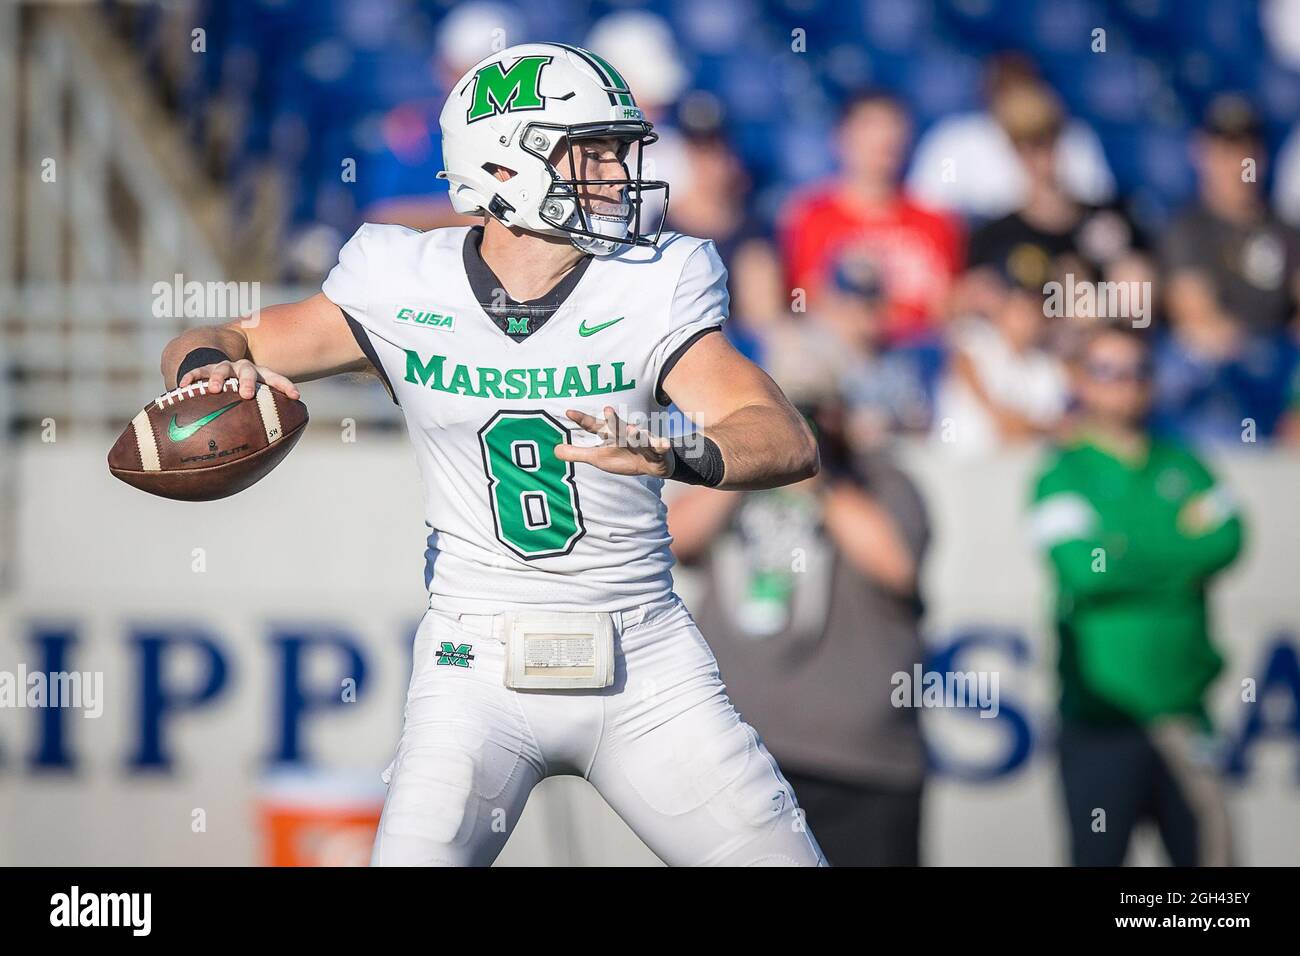 September 4, 2021: Marshall Thundering Herd quarterback Grant Wells (8) throws the ball during the regular season opening game between the Marshall Thundering Herd and the Navy Midshipmen at Navy-Marine Corps Memorial Stadium in Annapolis, Maryland Photographer: Cory Royster Stock Photo